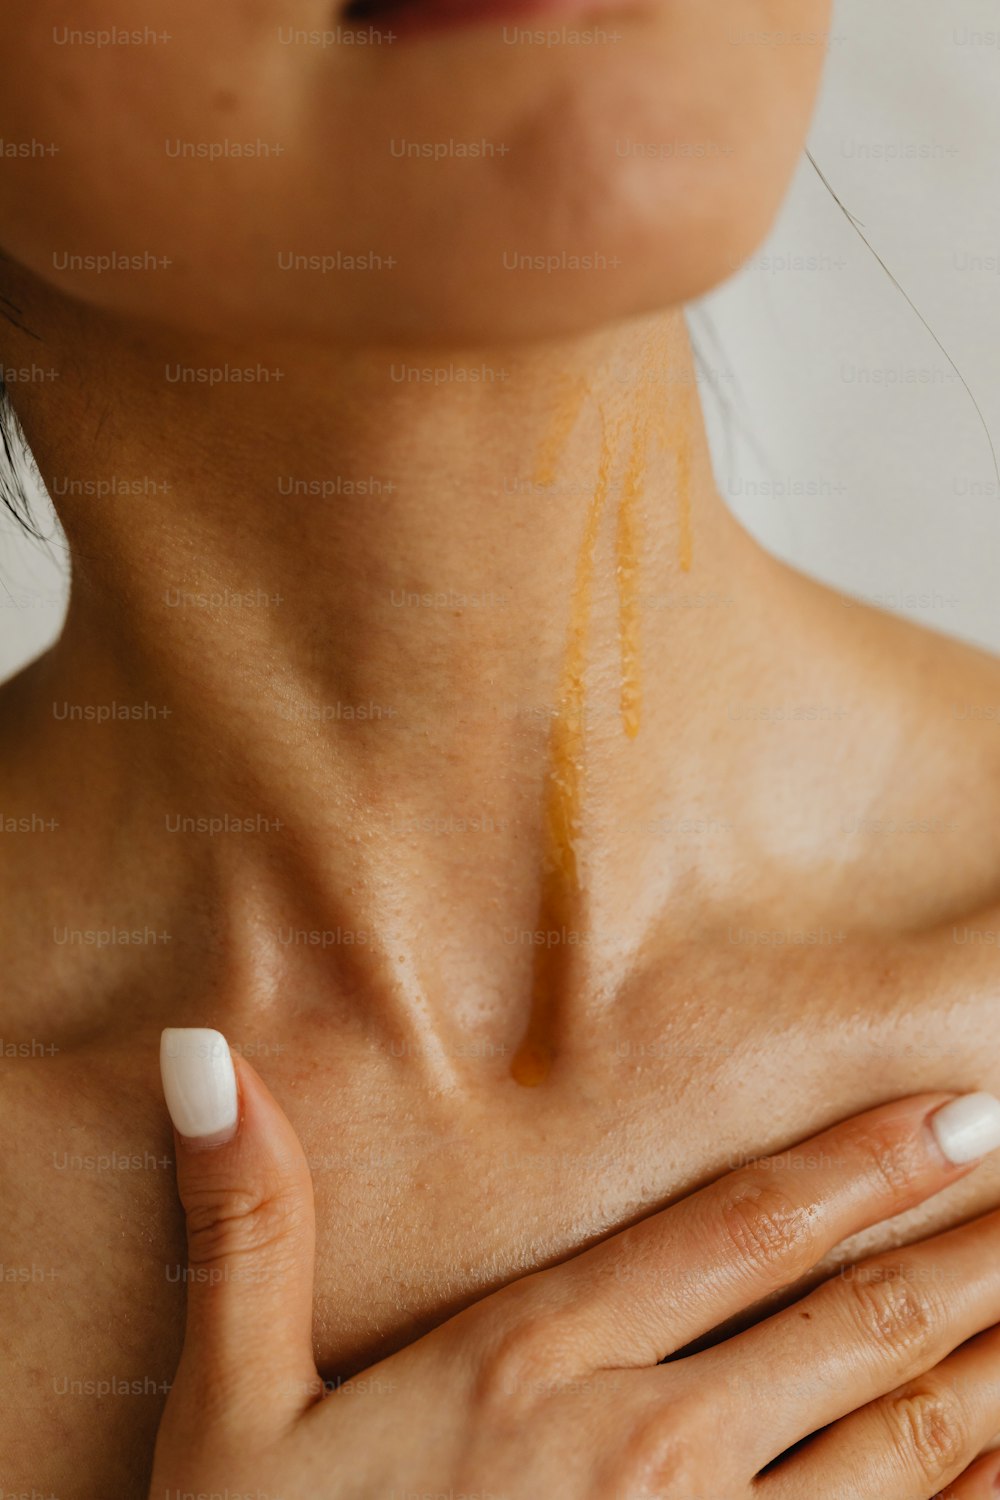 a woman holding her chest with a yellow substance on her chest